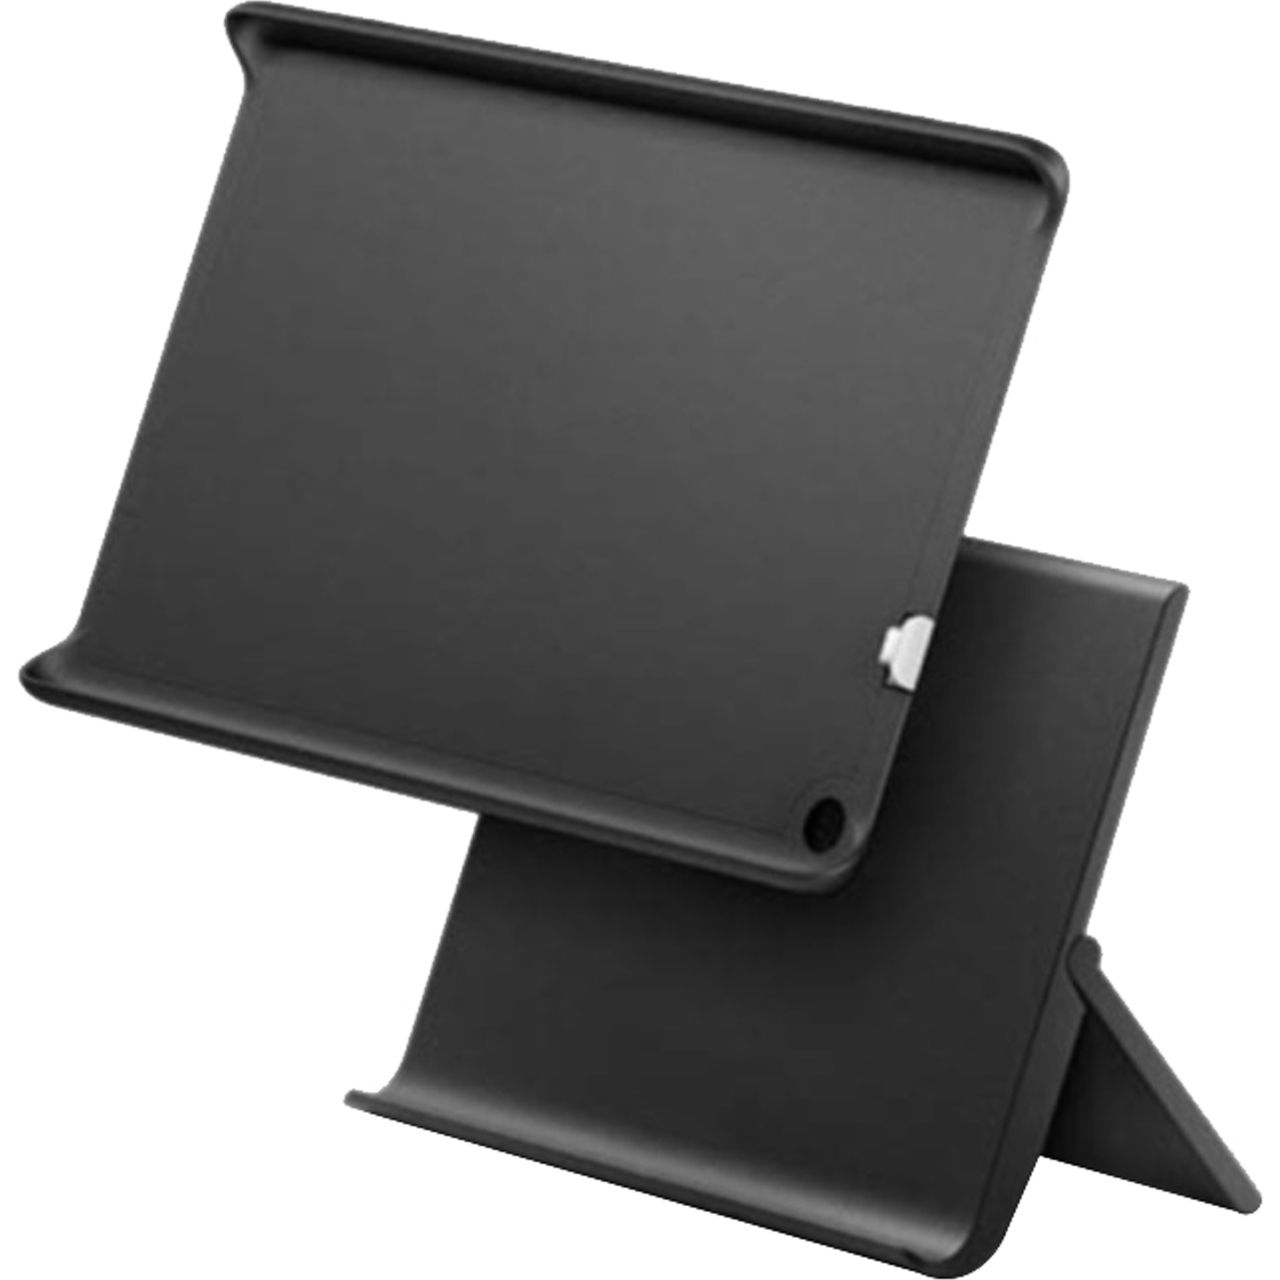 Amazon Fire Tablet Fire HD 8” Charging Dock Review